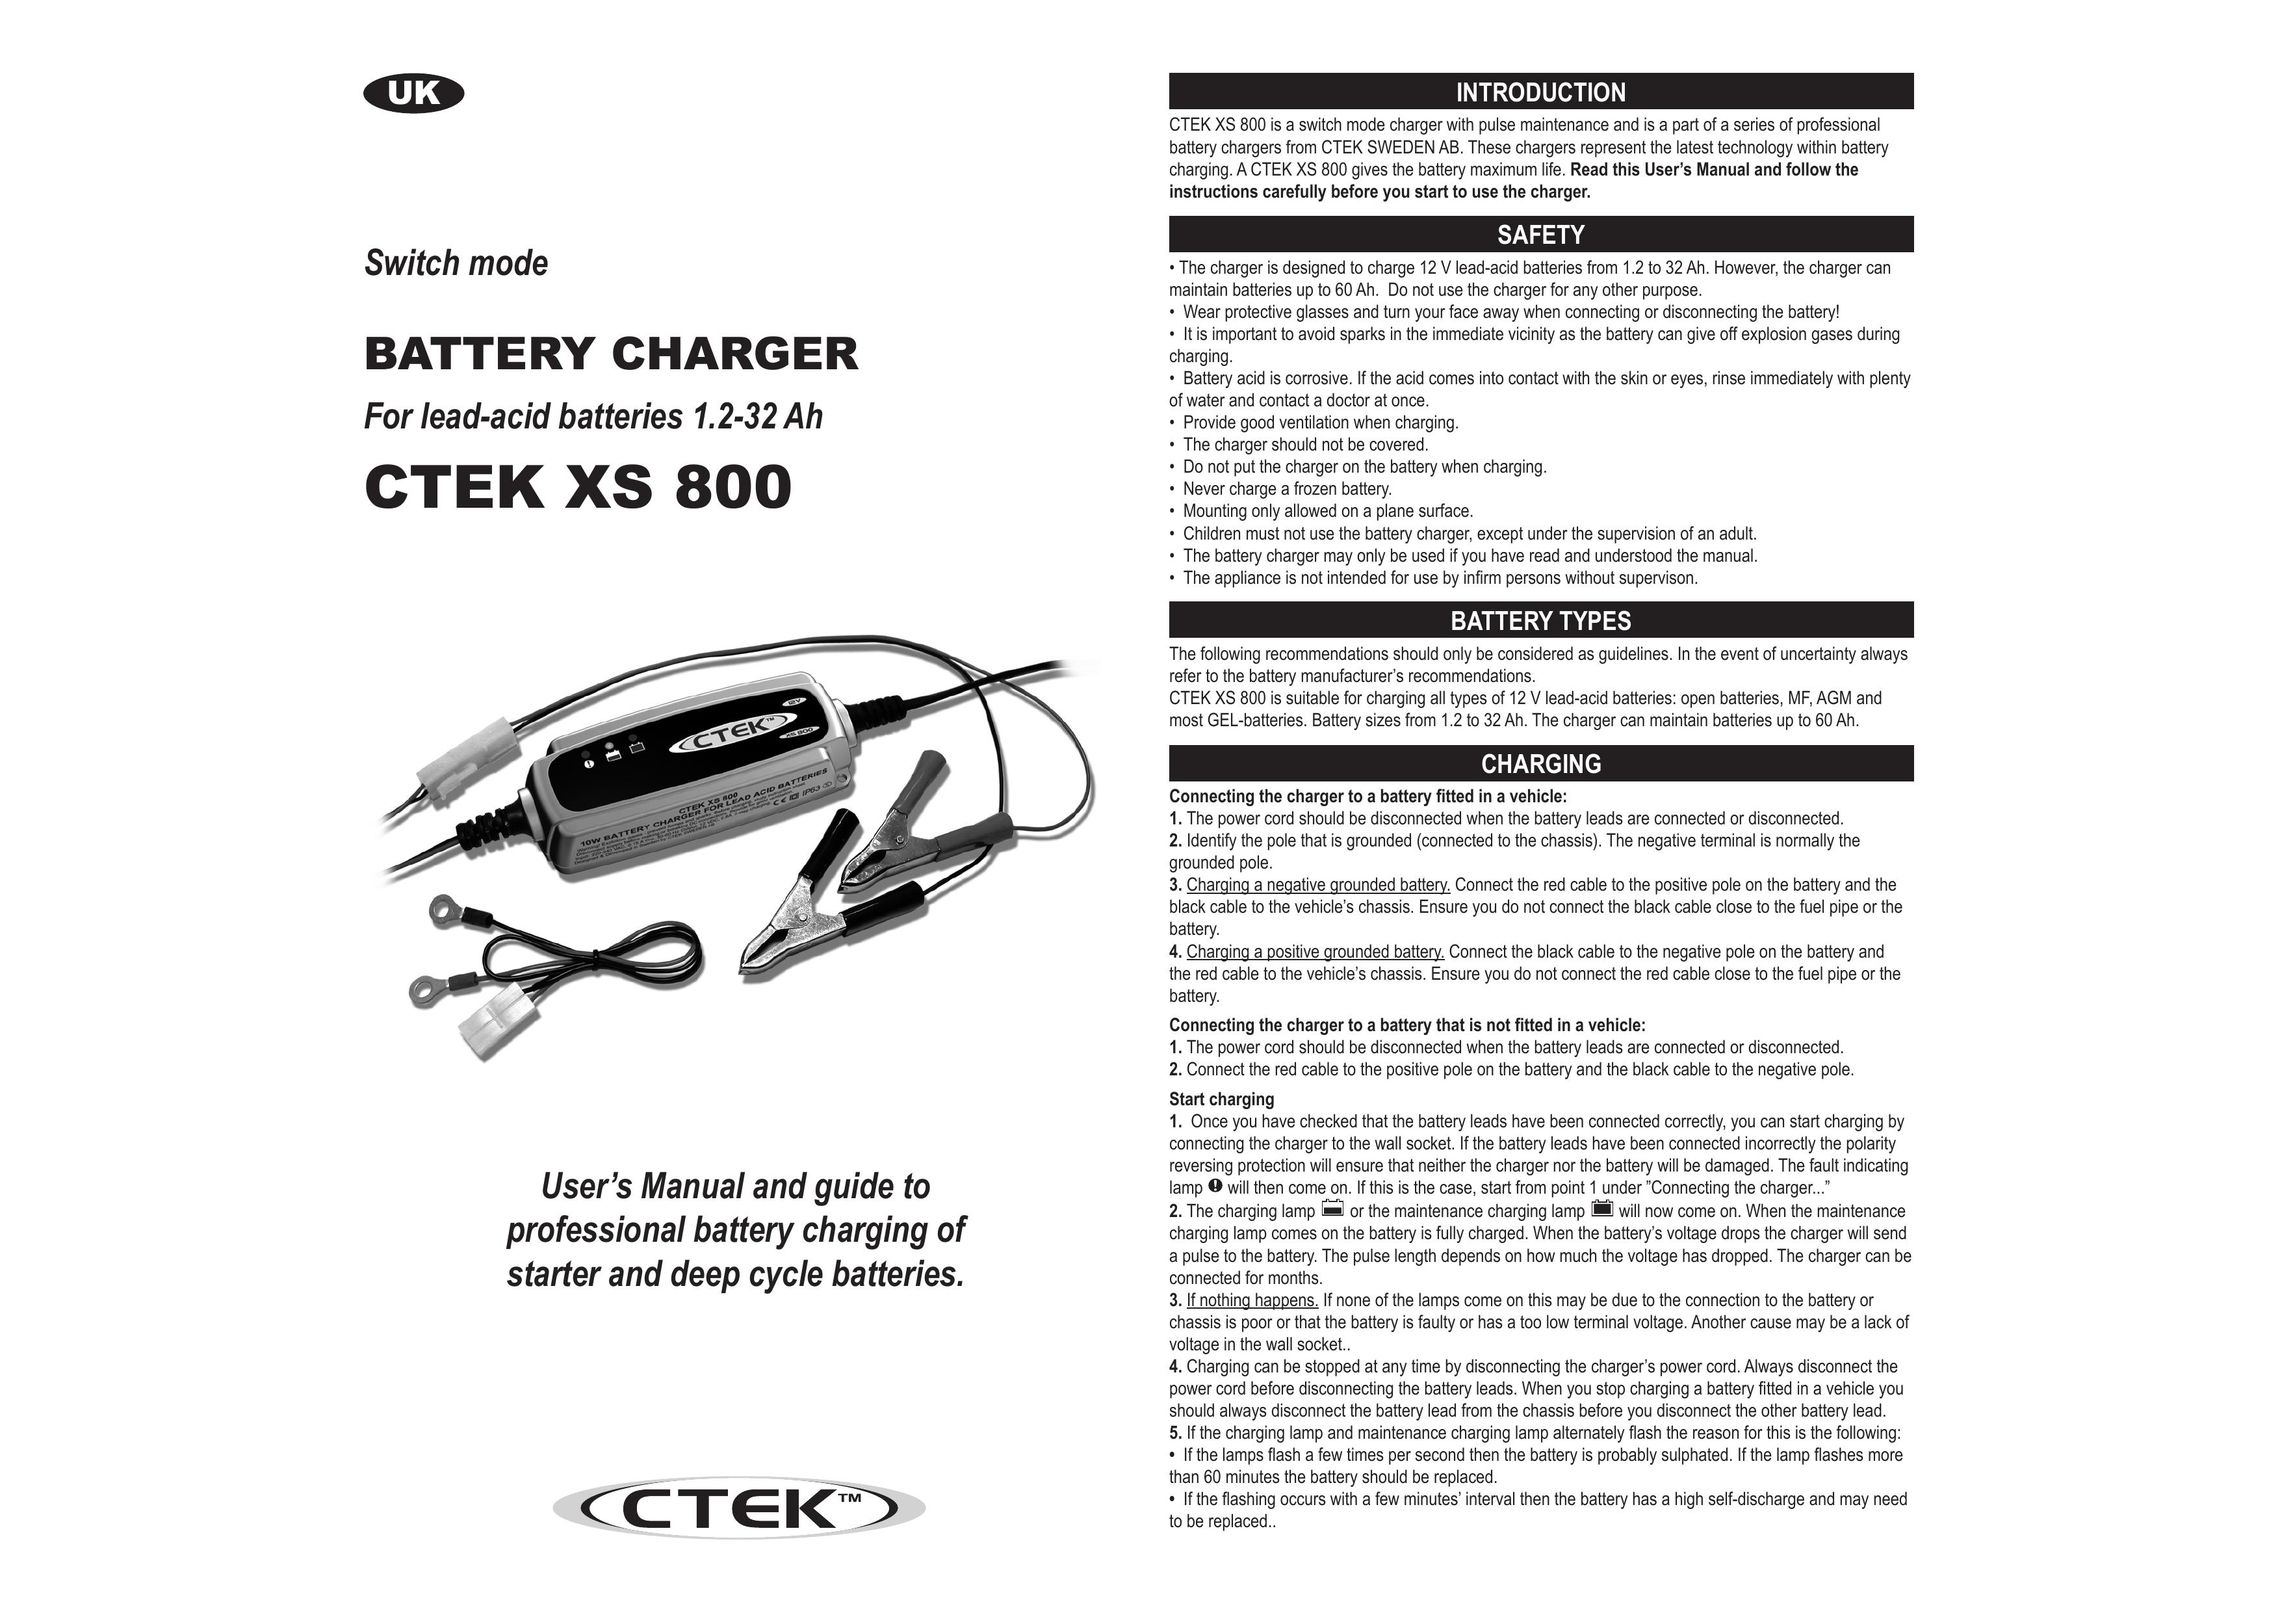 AB Soft CTEK XS 800 Battery Charger User Manual (Page 1)